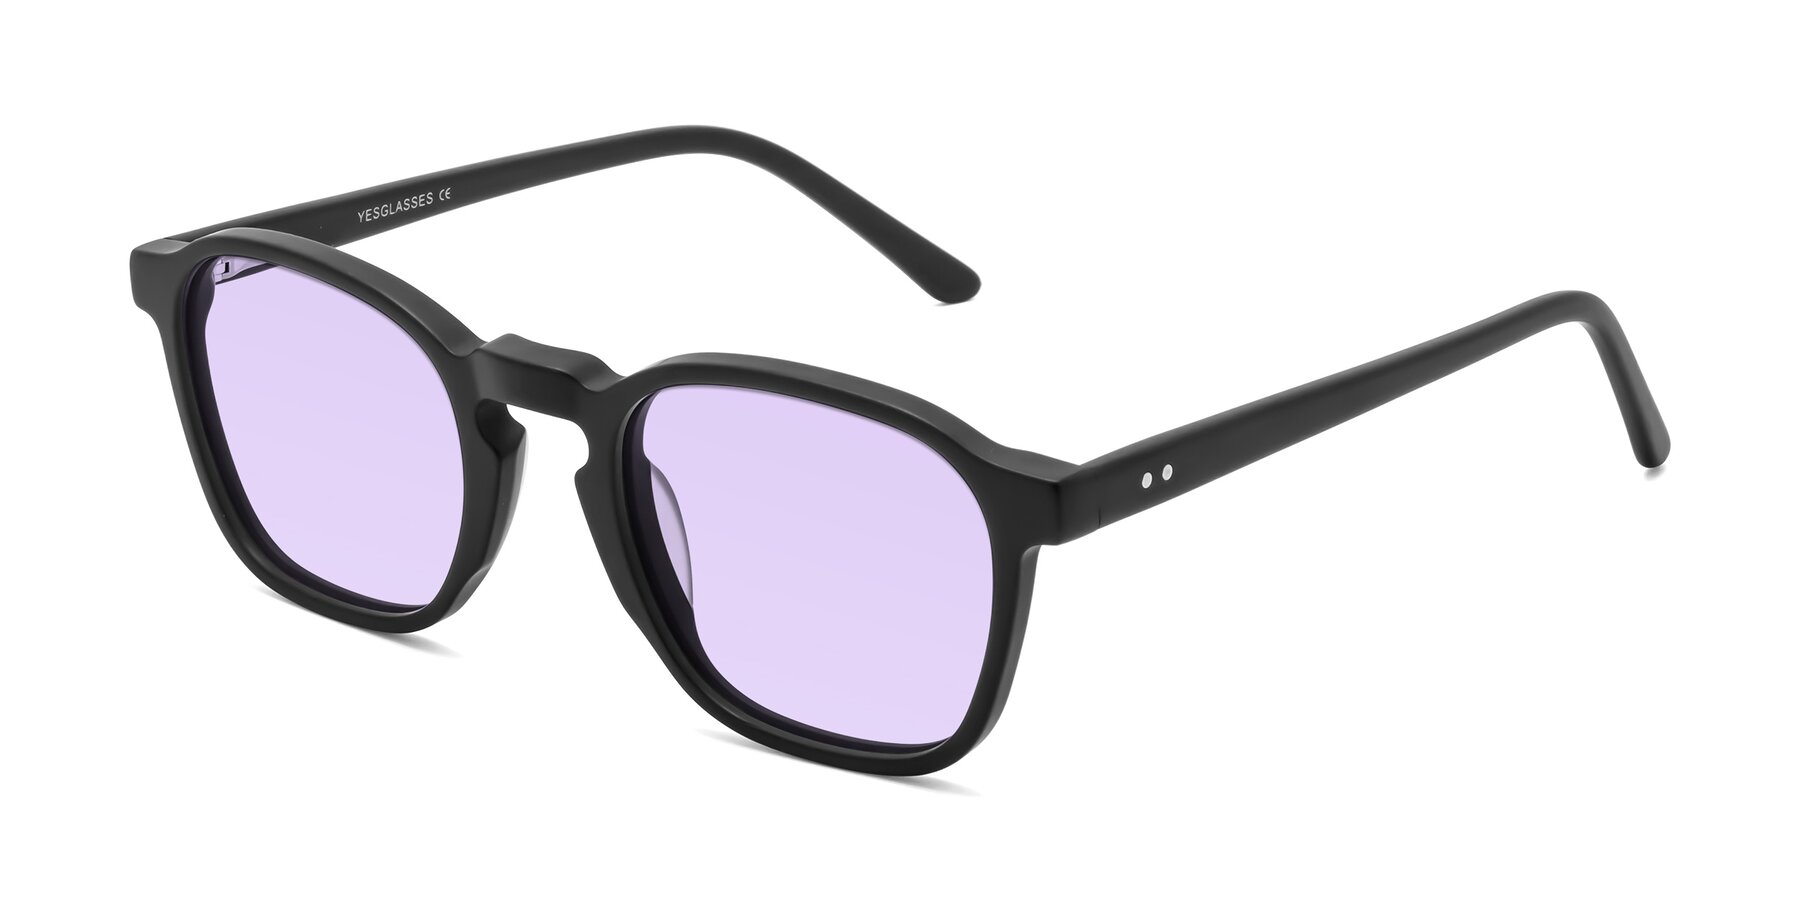 Angle of Generous in Matte Black with Light Purple Tinted Lenses